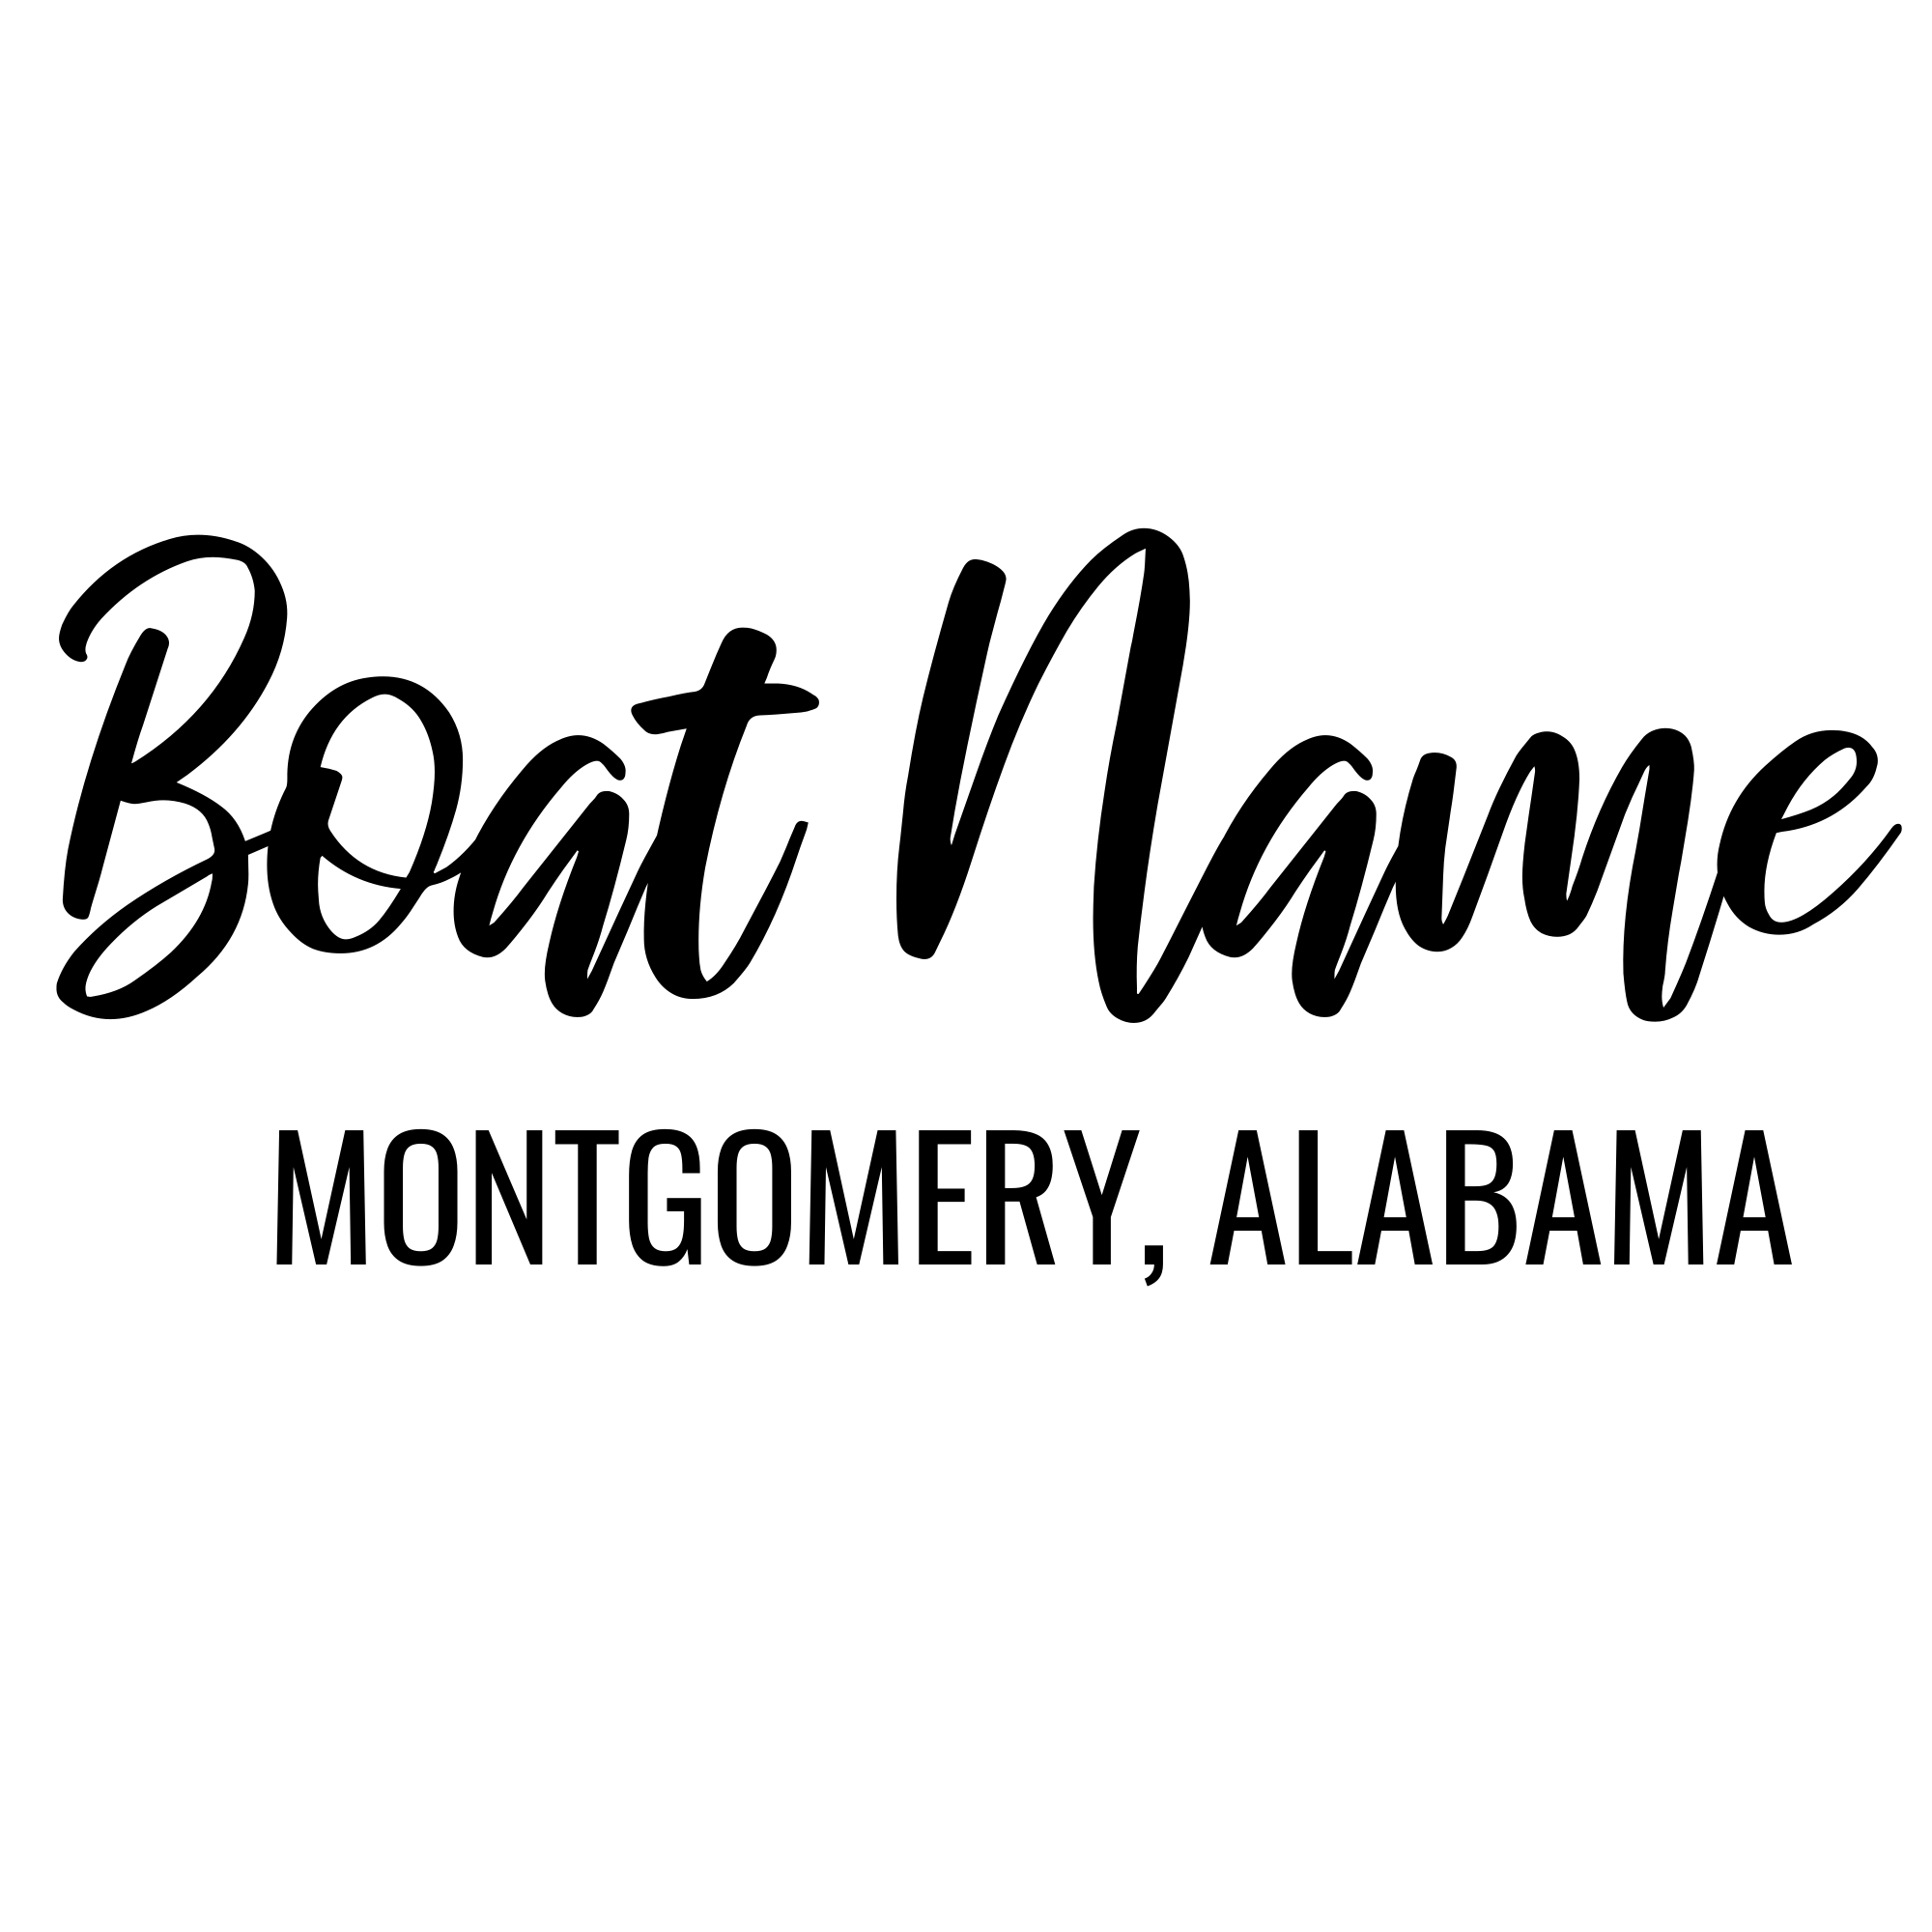 Personalized Boat Name Vinyl Decal with Hailing Port State - Permanent Marine-Grade for Signs, Speed boat, Fishing Vessel, Watercraft C15, B1